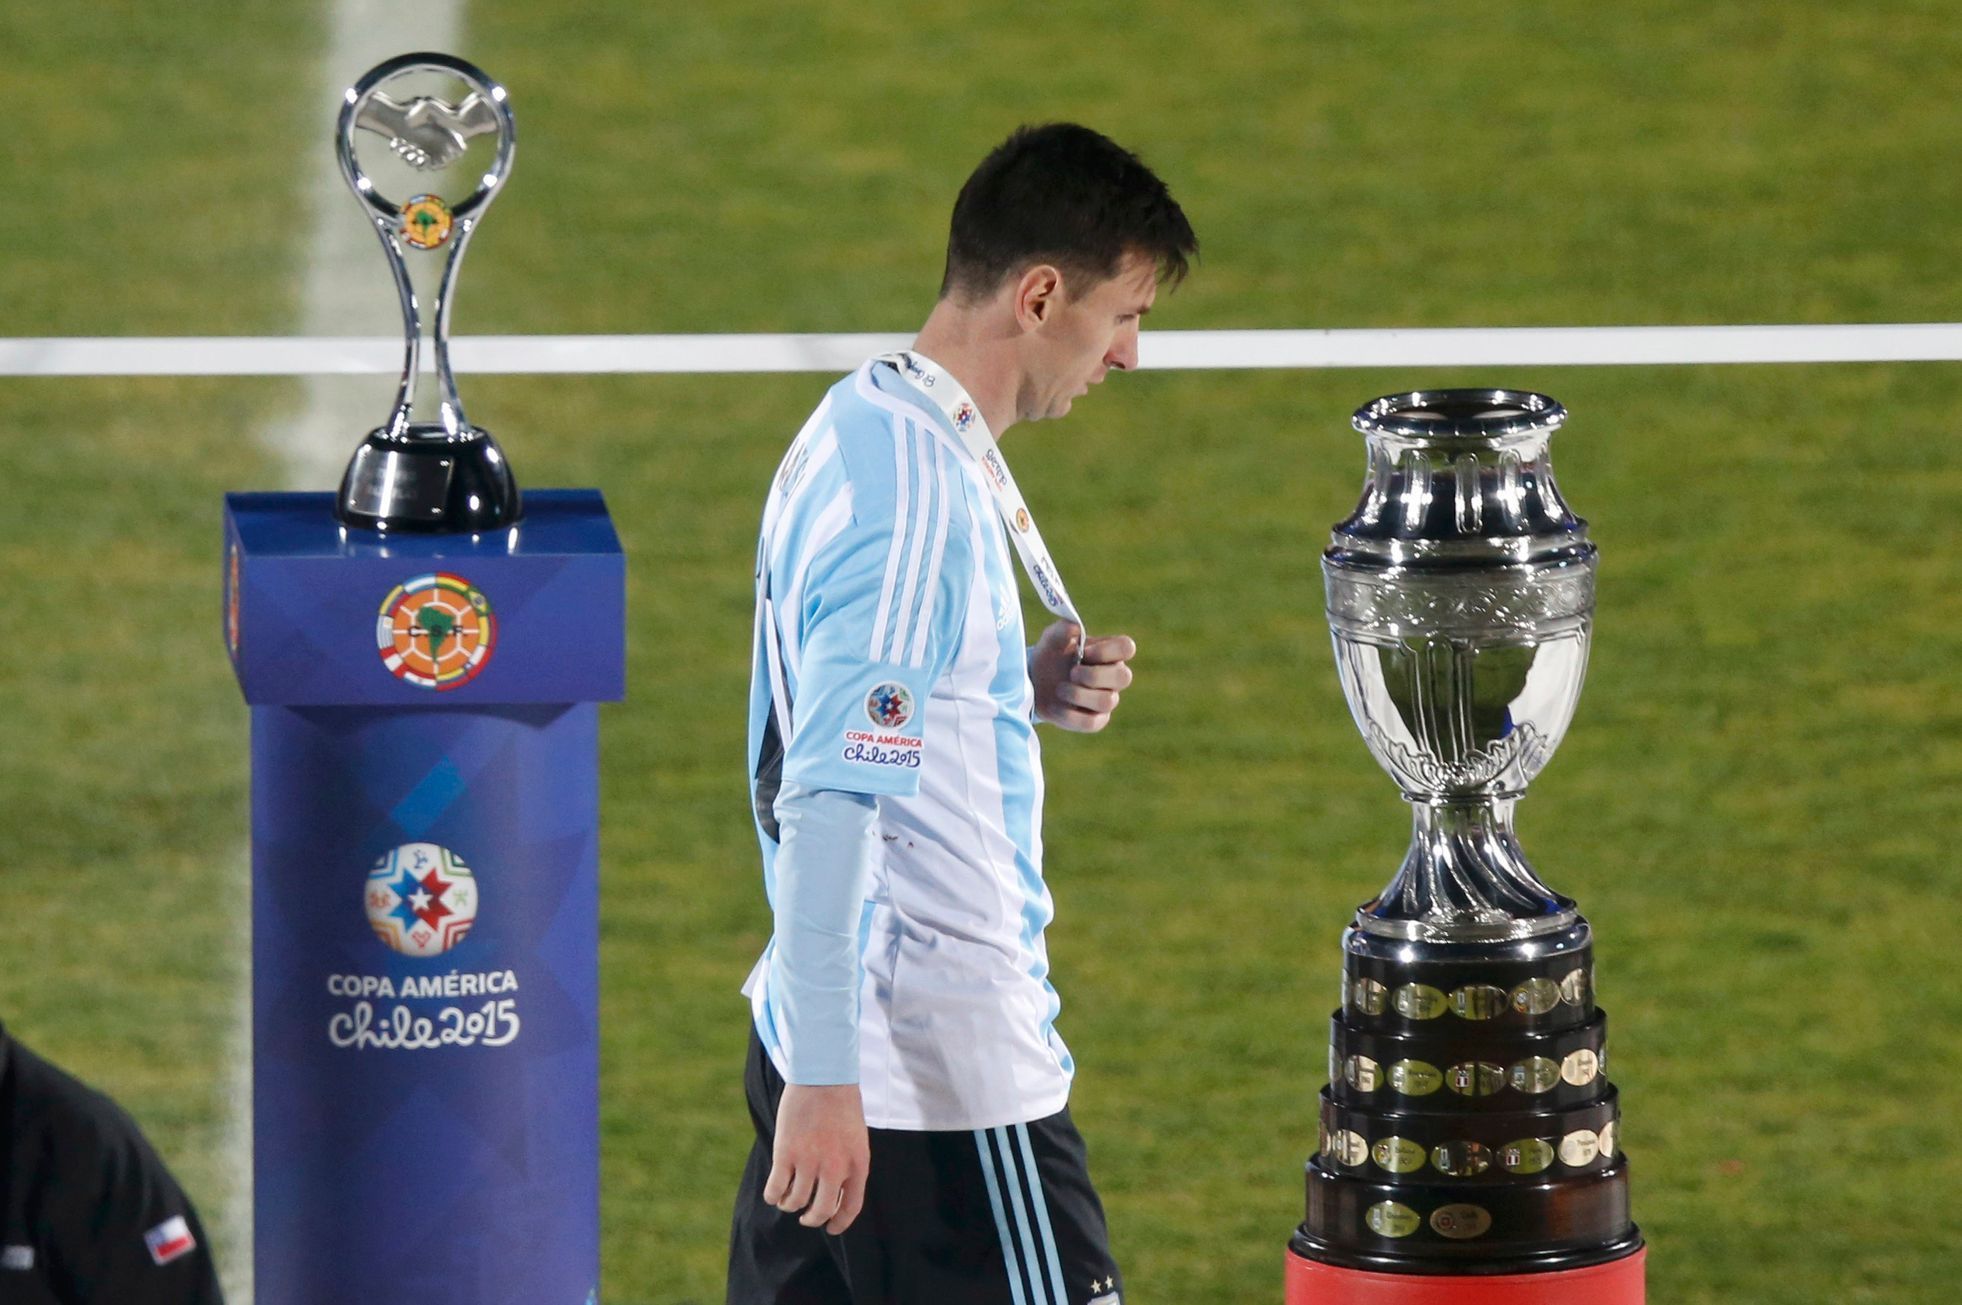 Argentina's Lionel Messi walks with his silver medal past the Copa America trophy during the presentation ceremony after Chile defeated his team in the Copa America 2015 final soccer match at the Nati